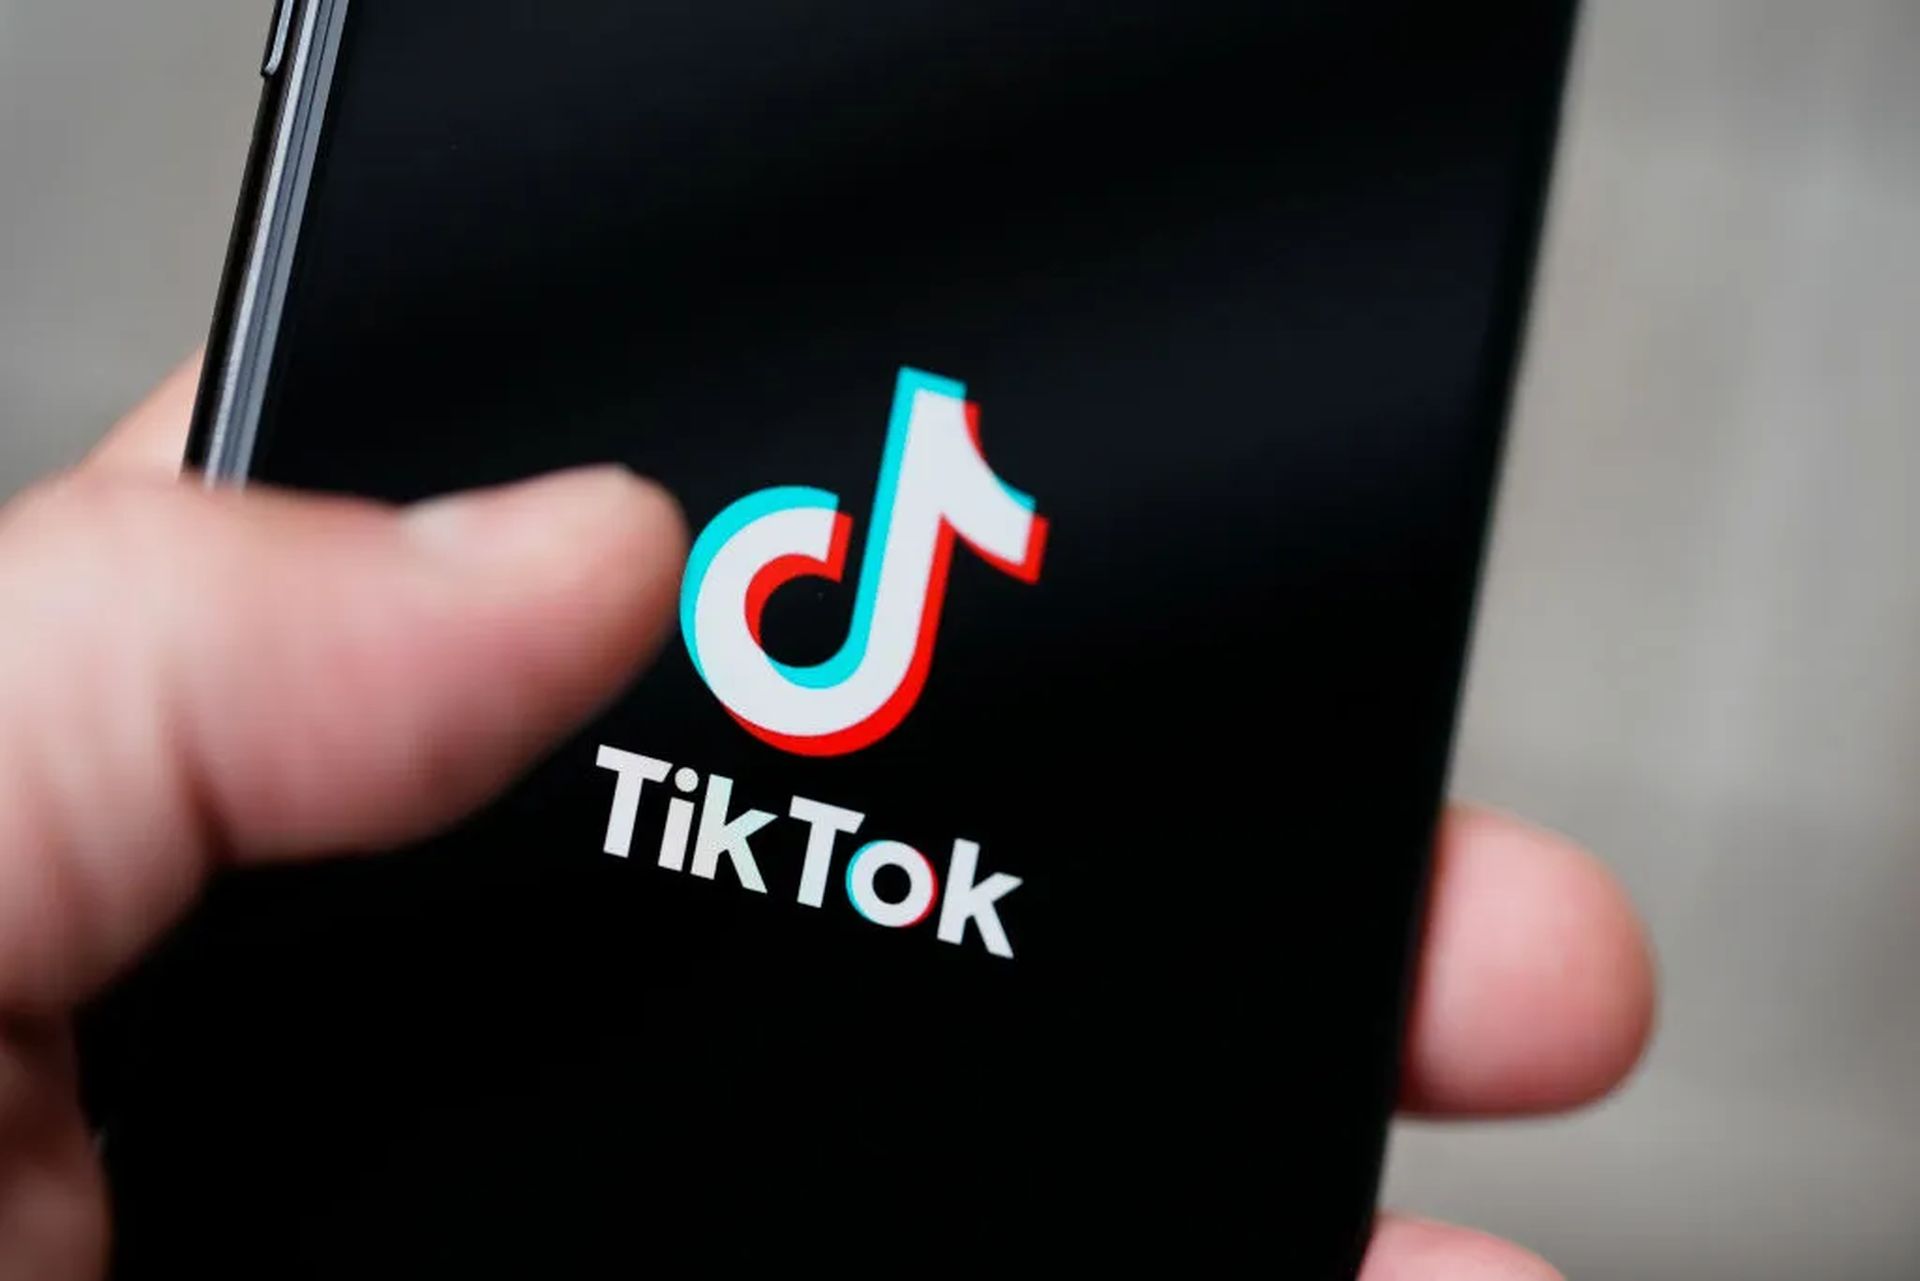 In this article, we are going to be covering is TikTok banned in US and explain what really happened during Attorney General’s press conference.